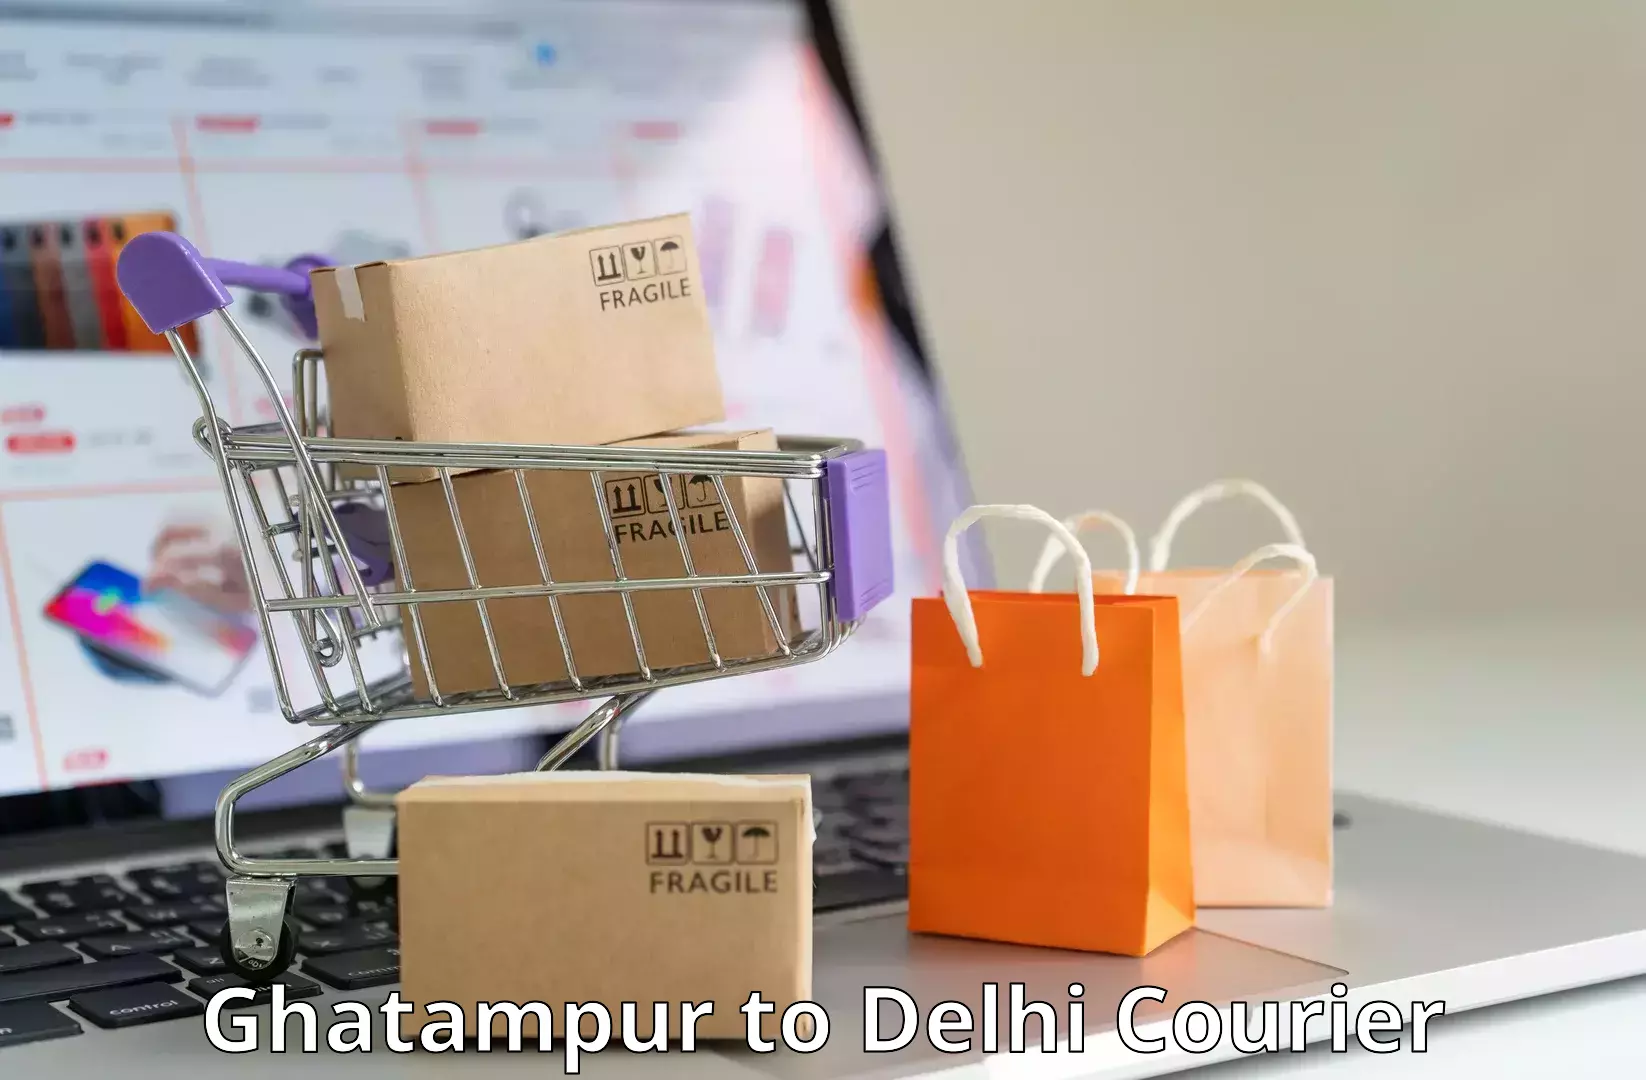 Express delivery capabilities Ghatampur to Krishna Nagar